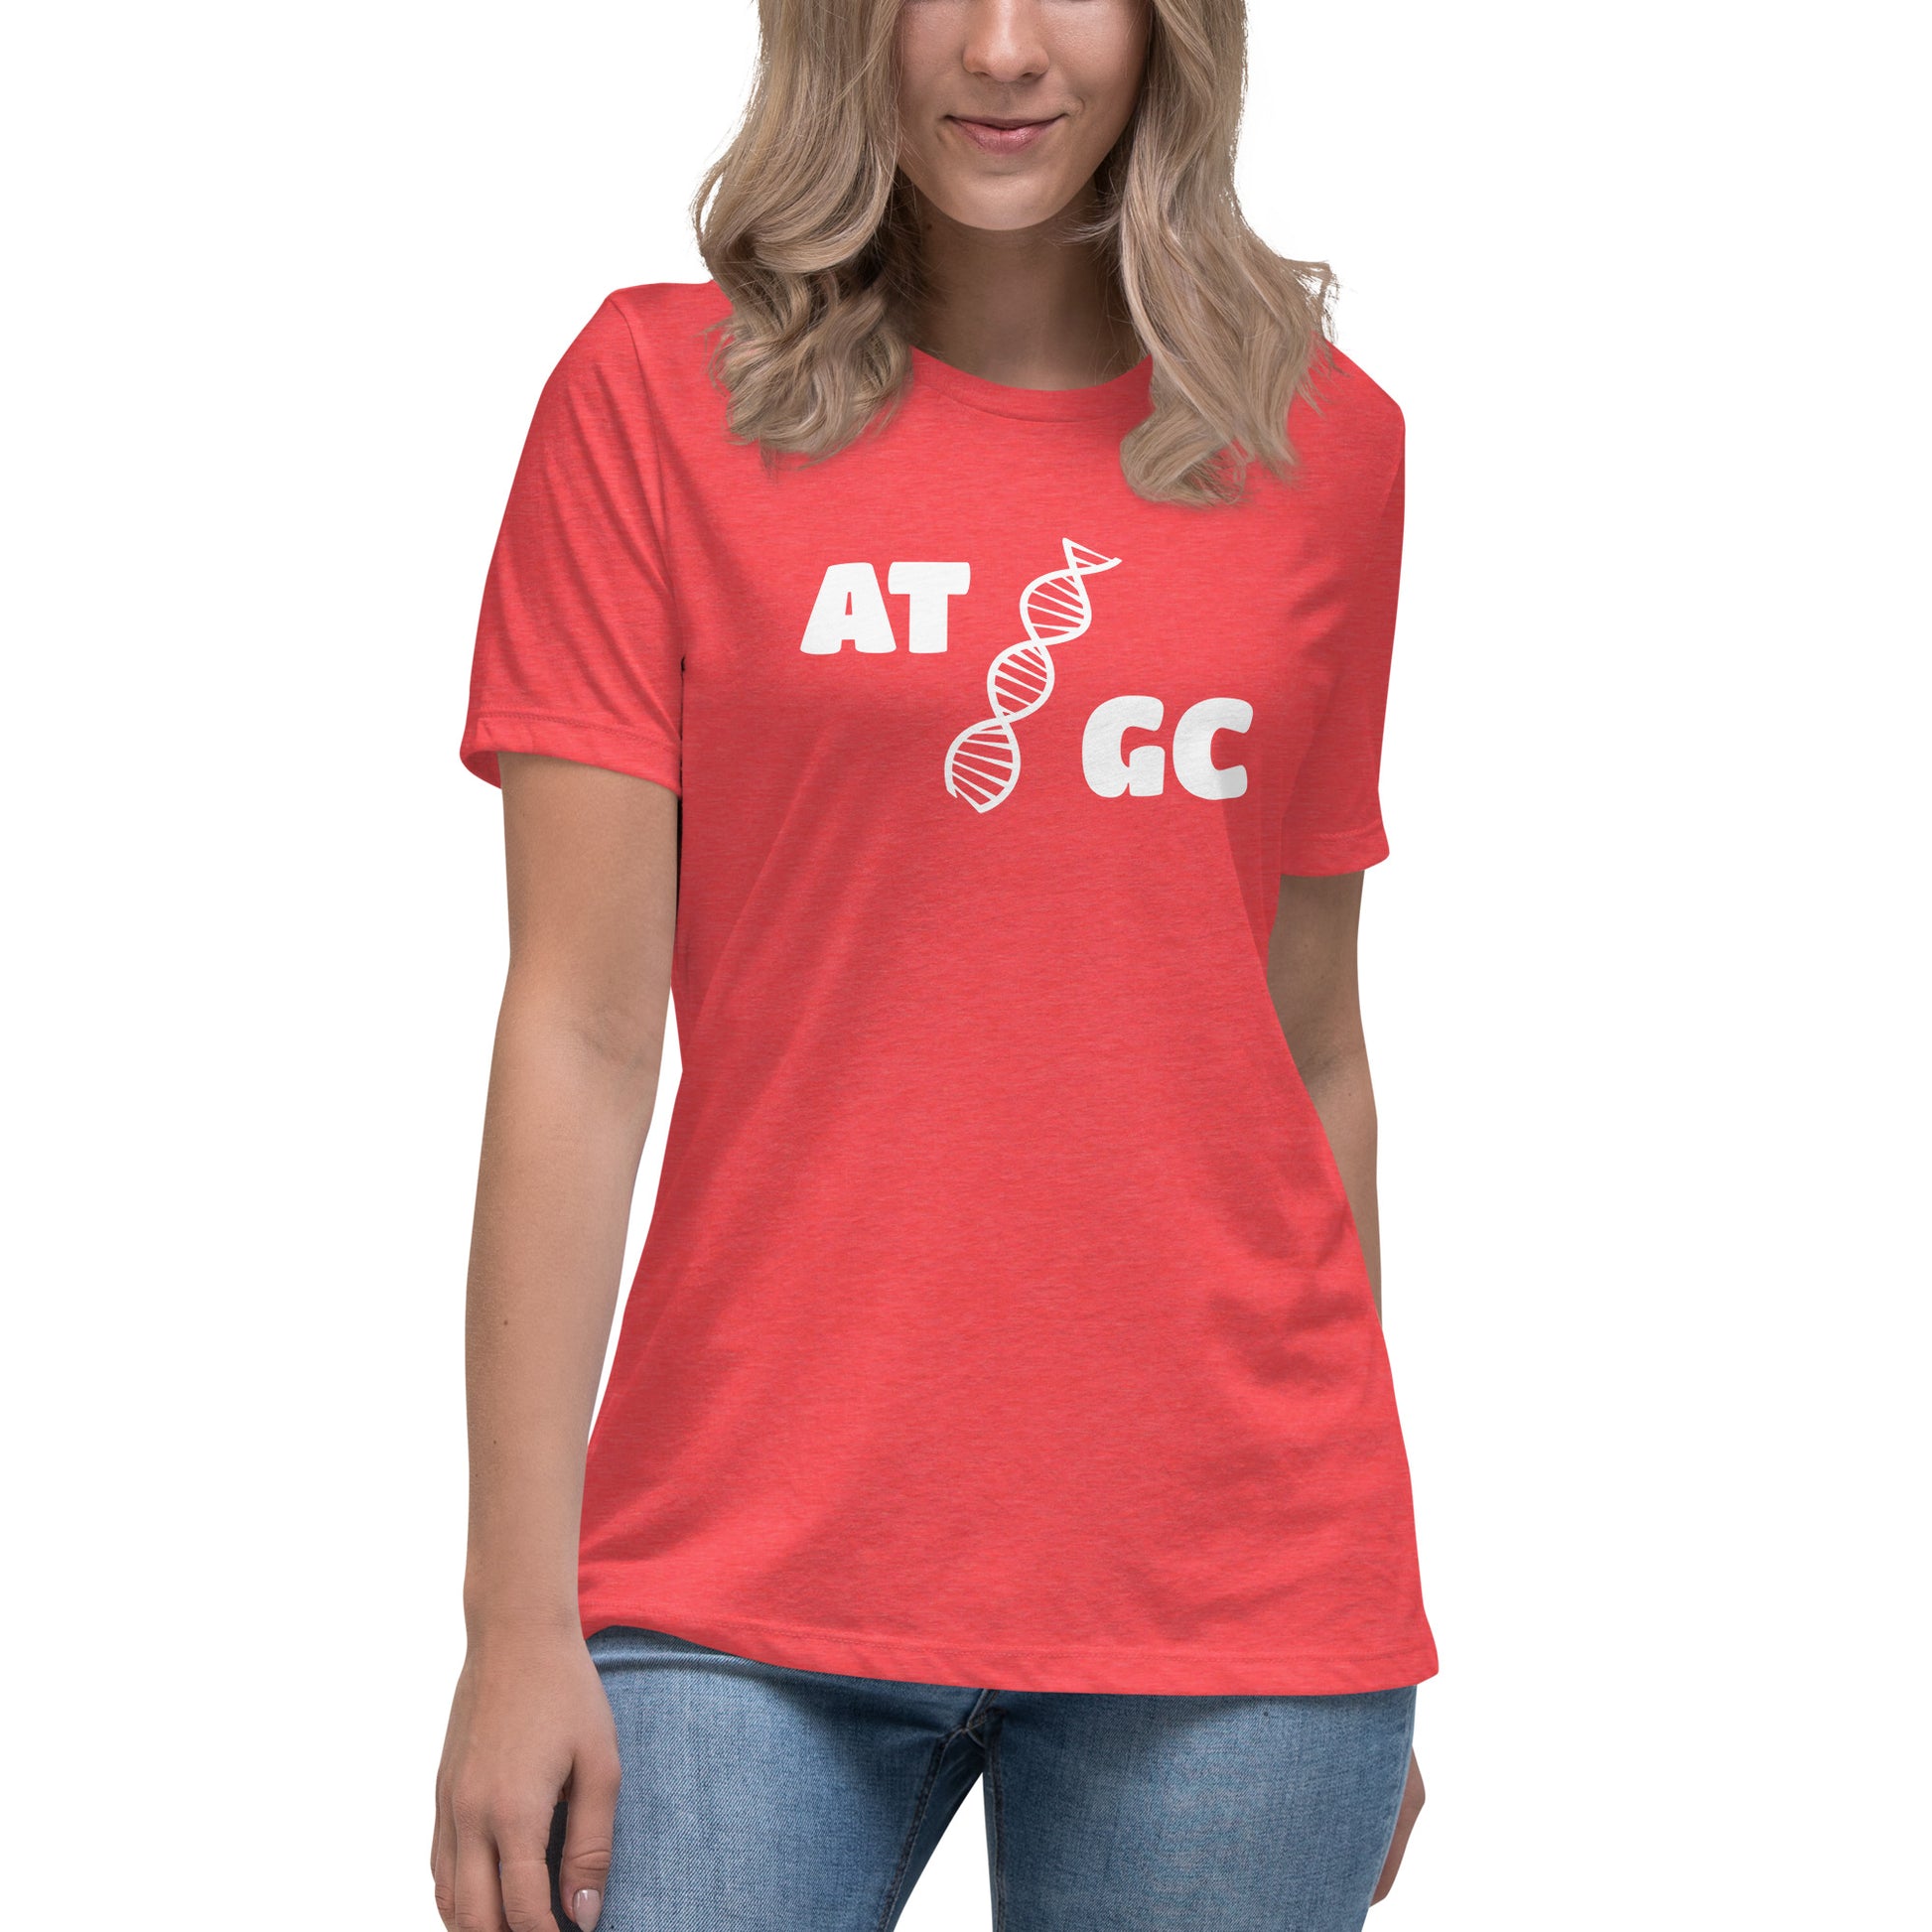 Women with red t-shirt with image of a DNA string and the text "ATGC"